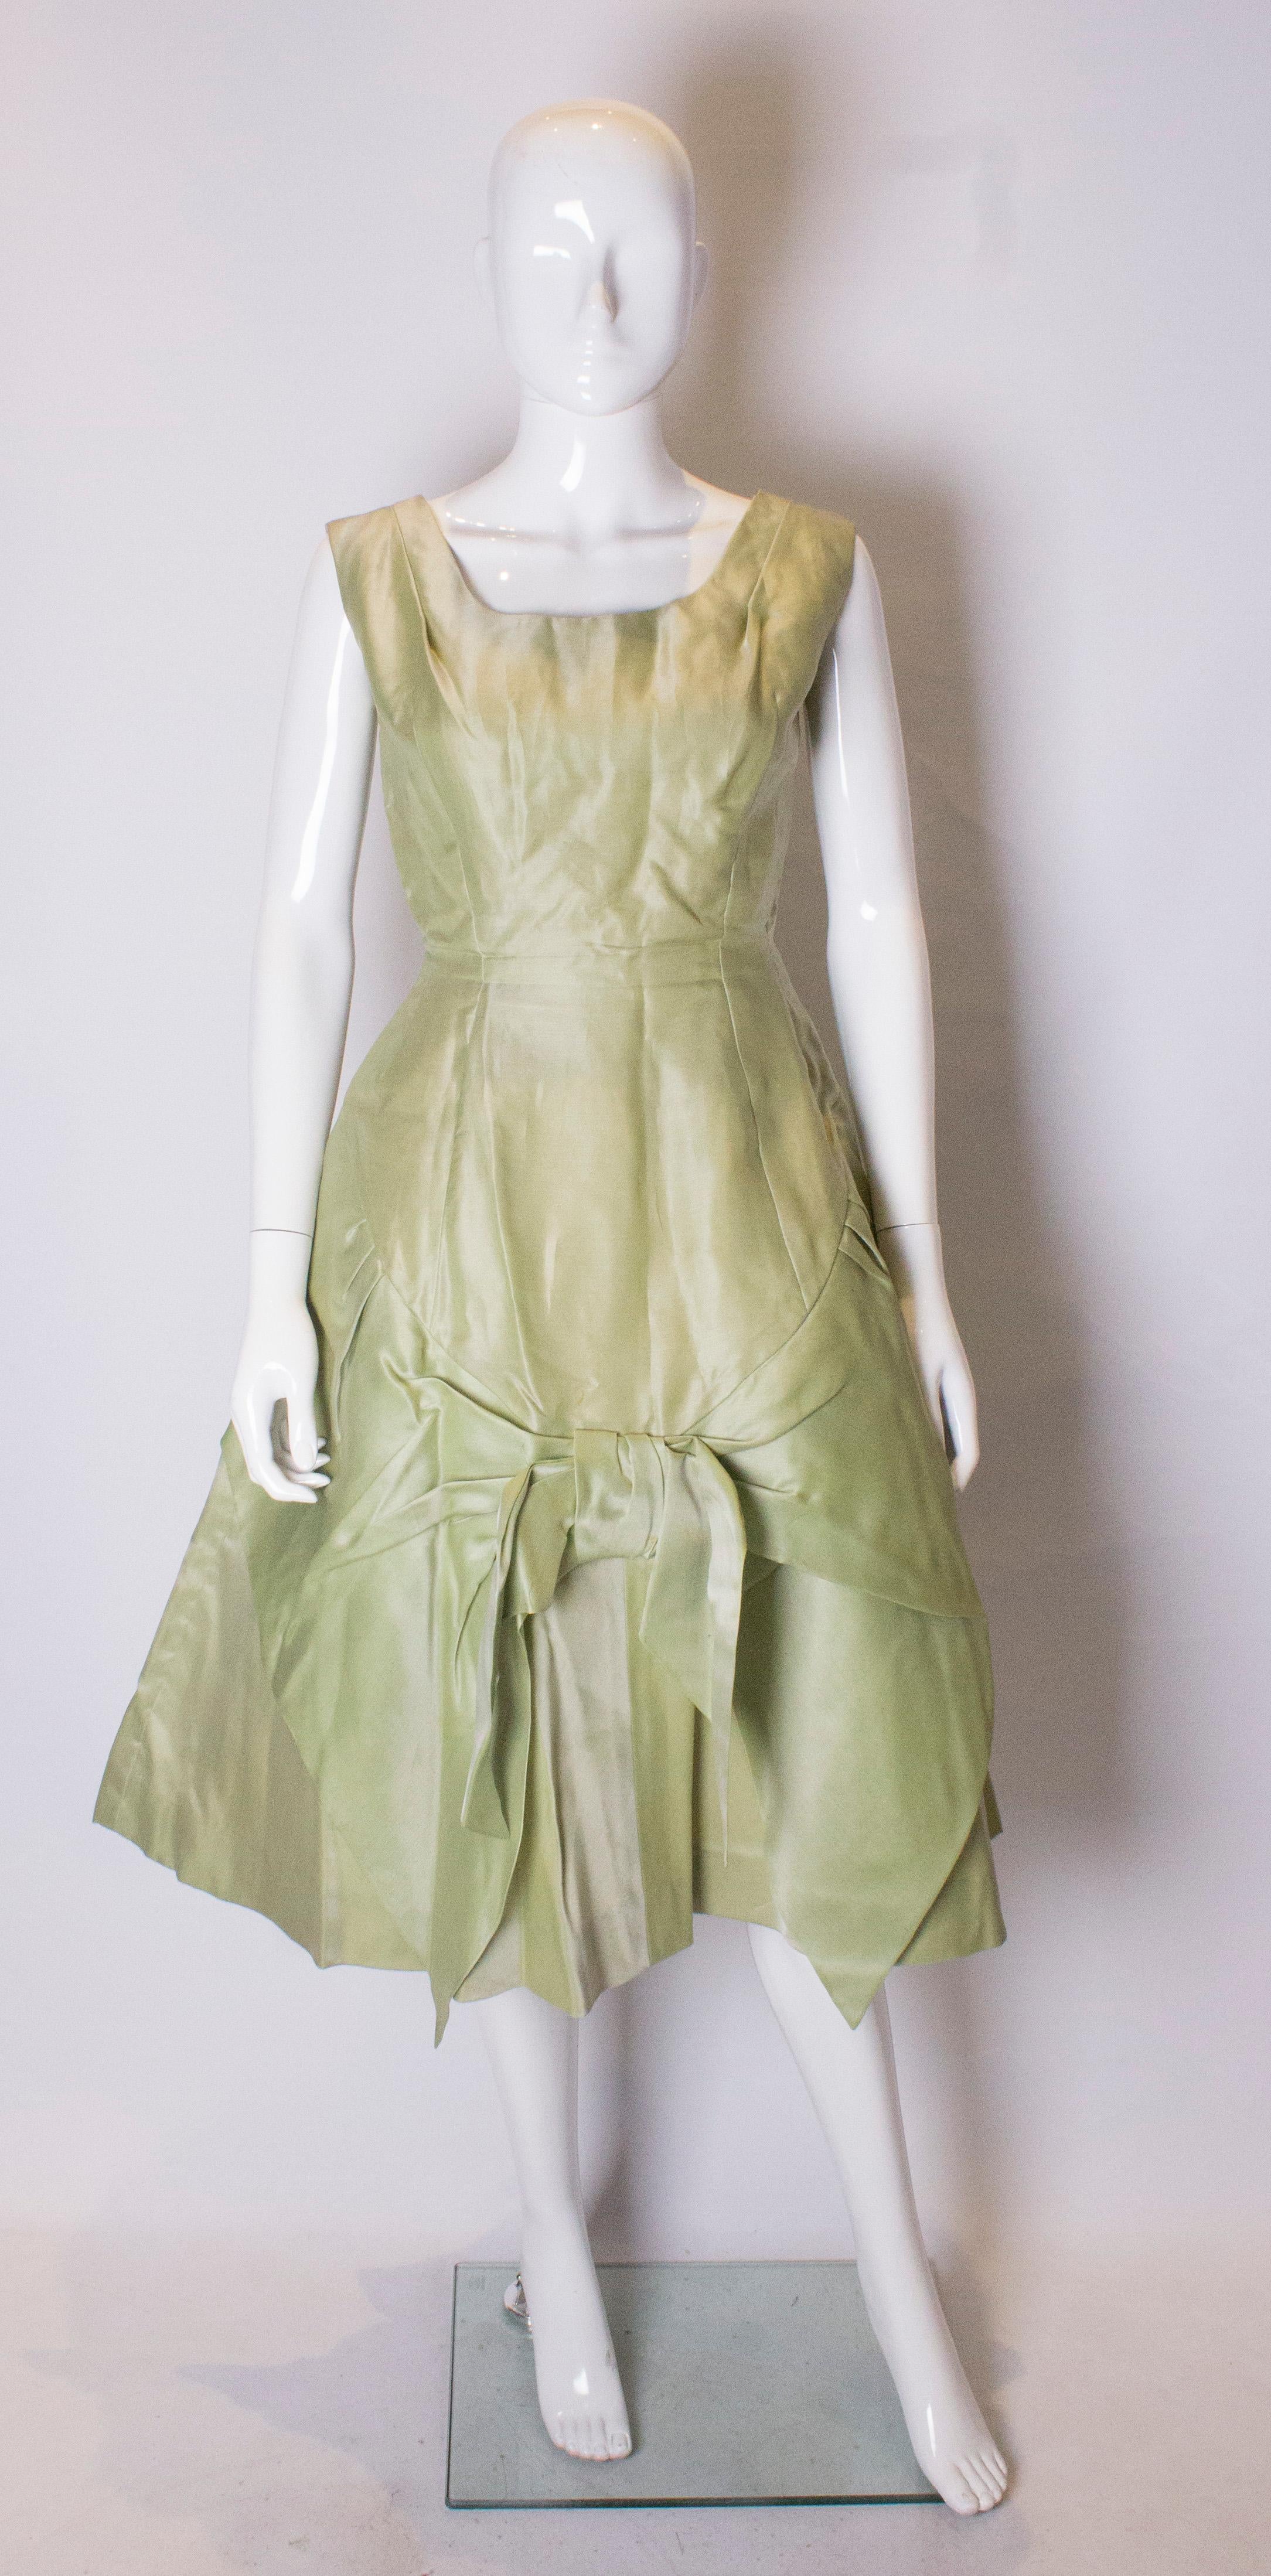 A pretty vintage cocktail dress by Cresta Couture . The dress is in a pistachio green colour and has a round neckline, full skirt with bow detail, central back zip and layers of petticoats.